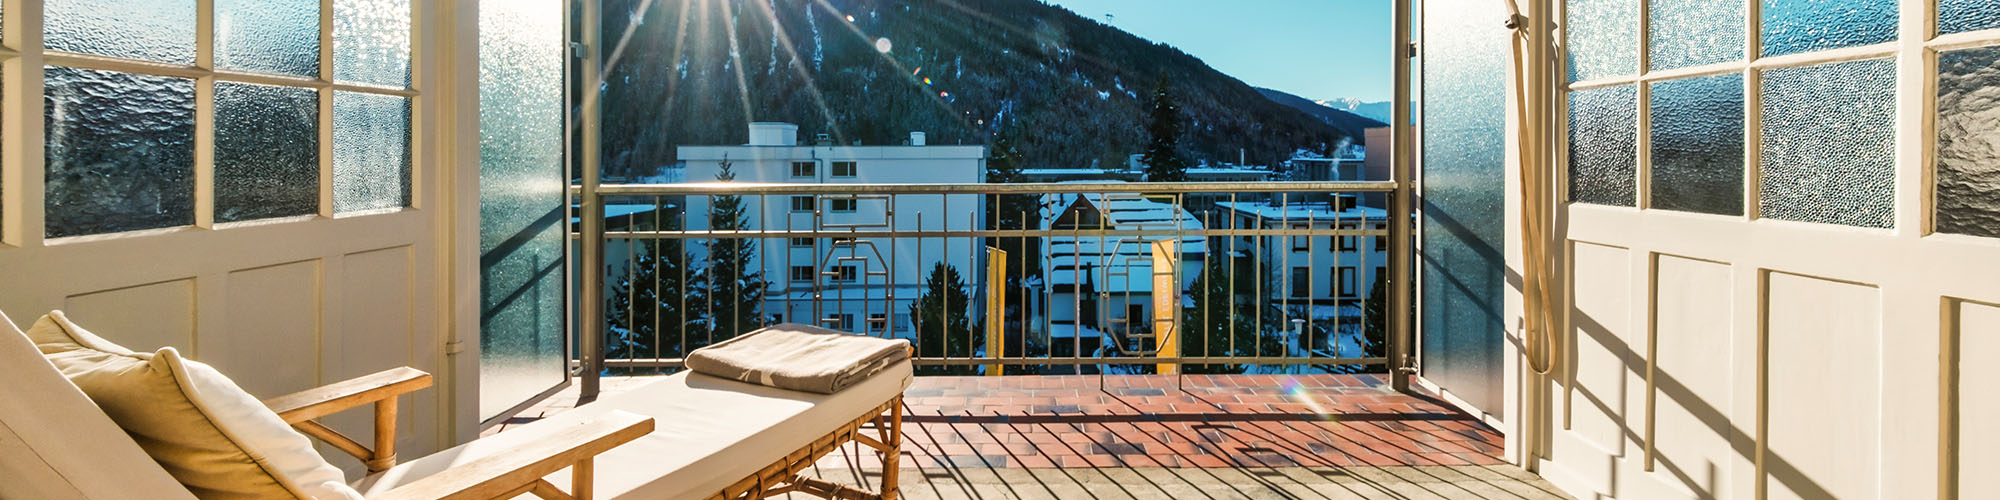 Hotel Davos - An bester Lage - in Davos